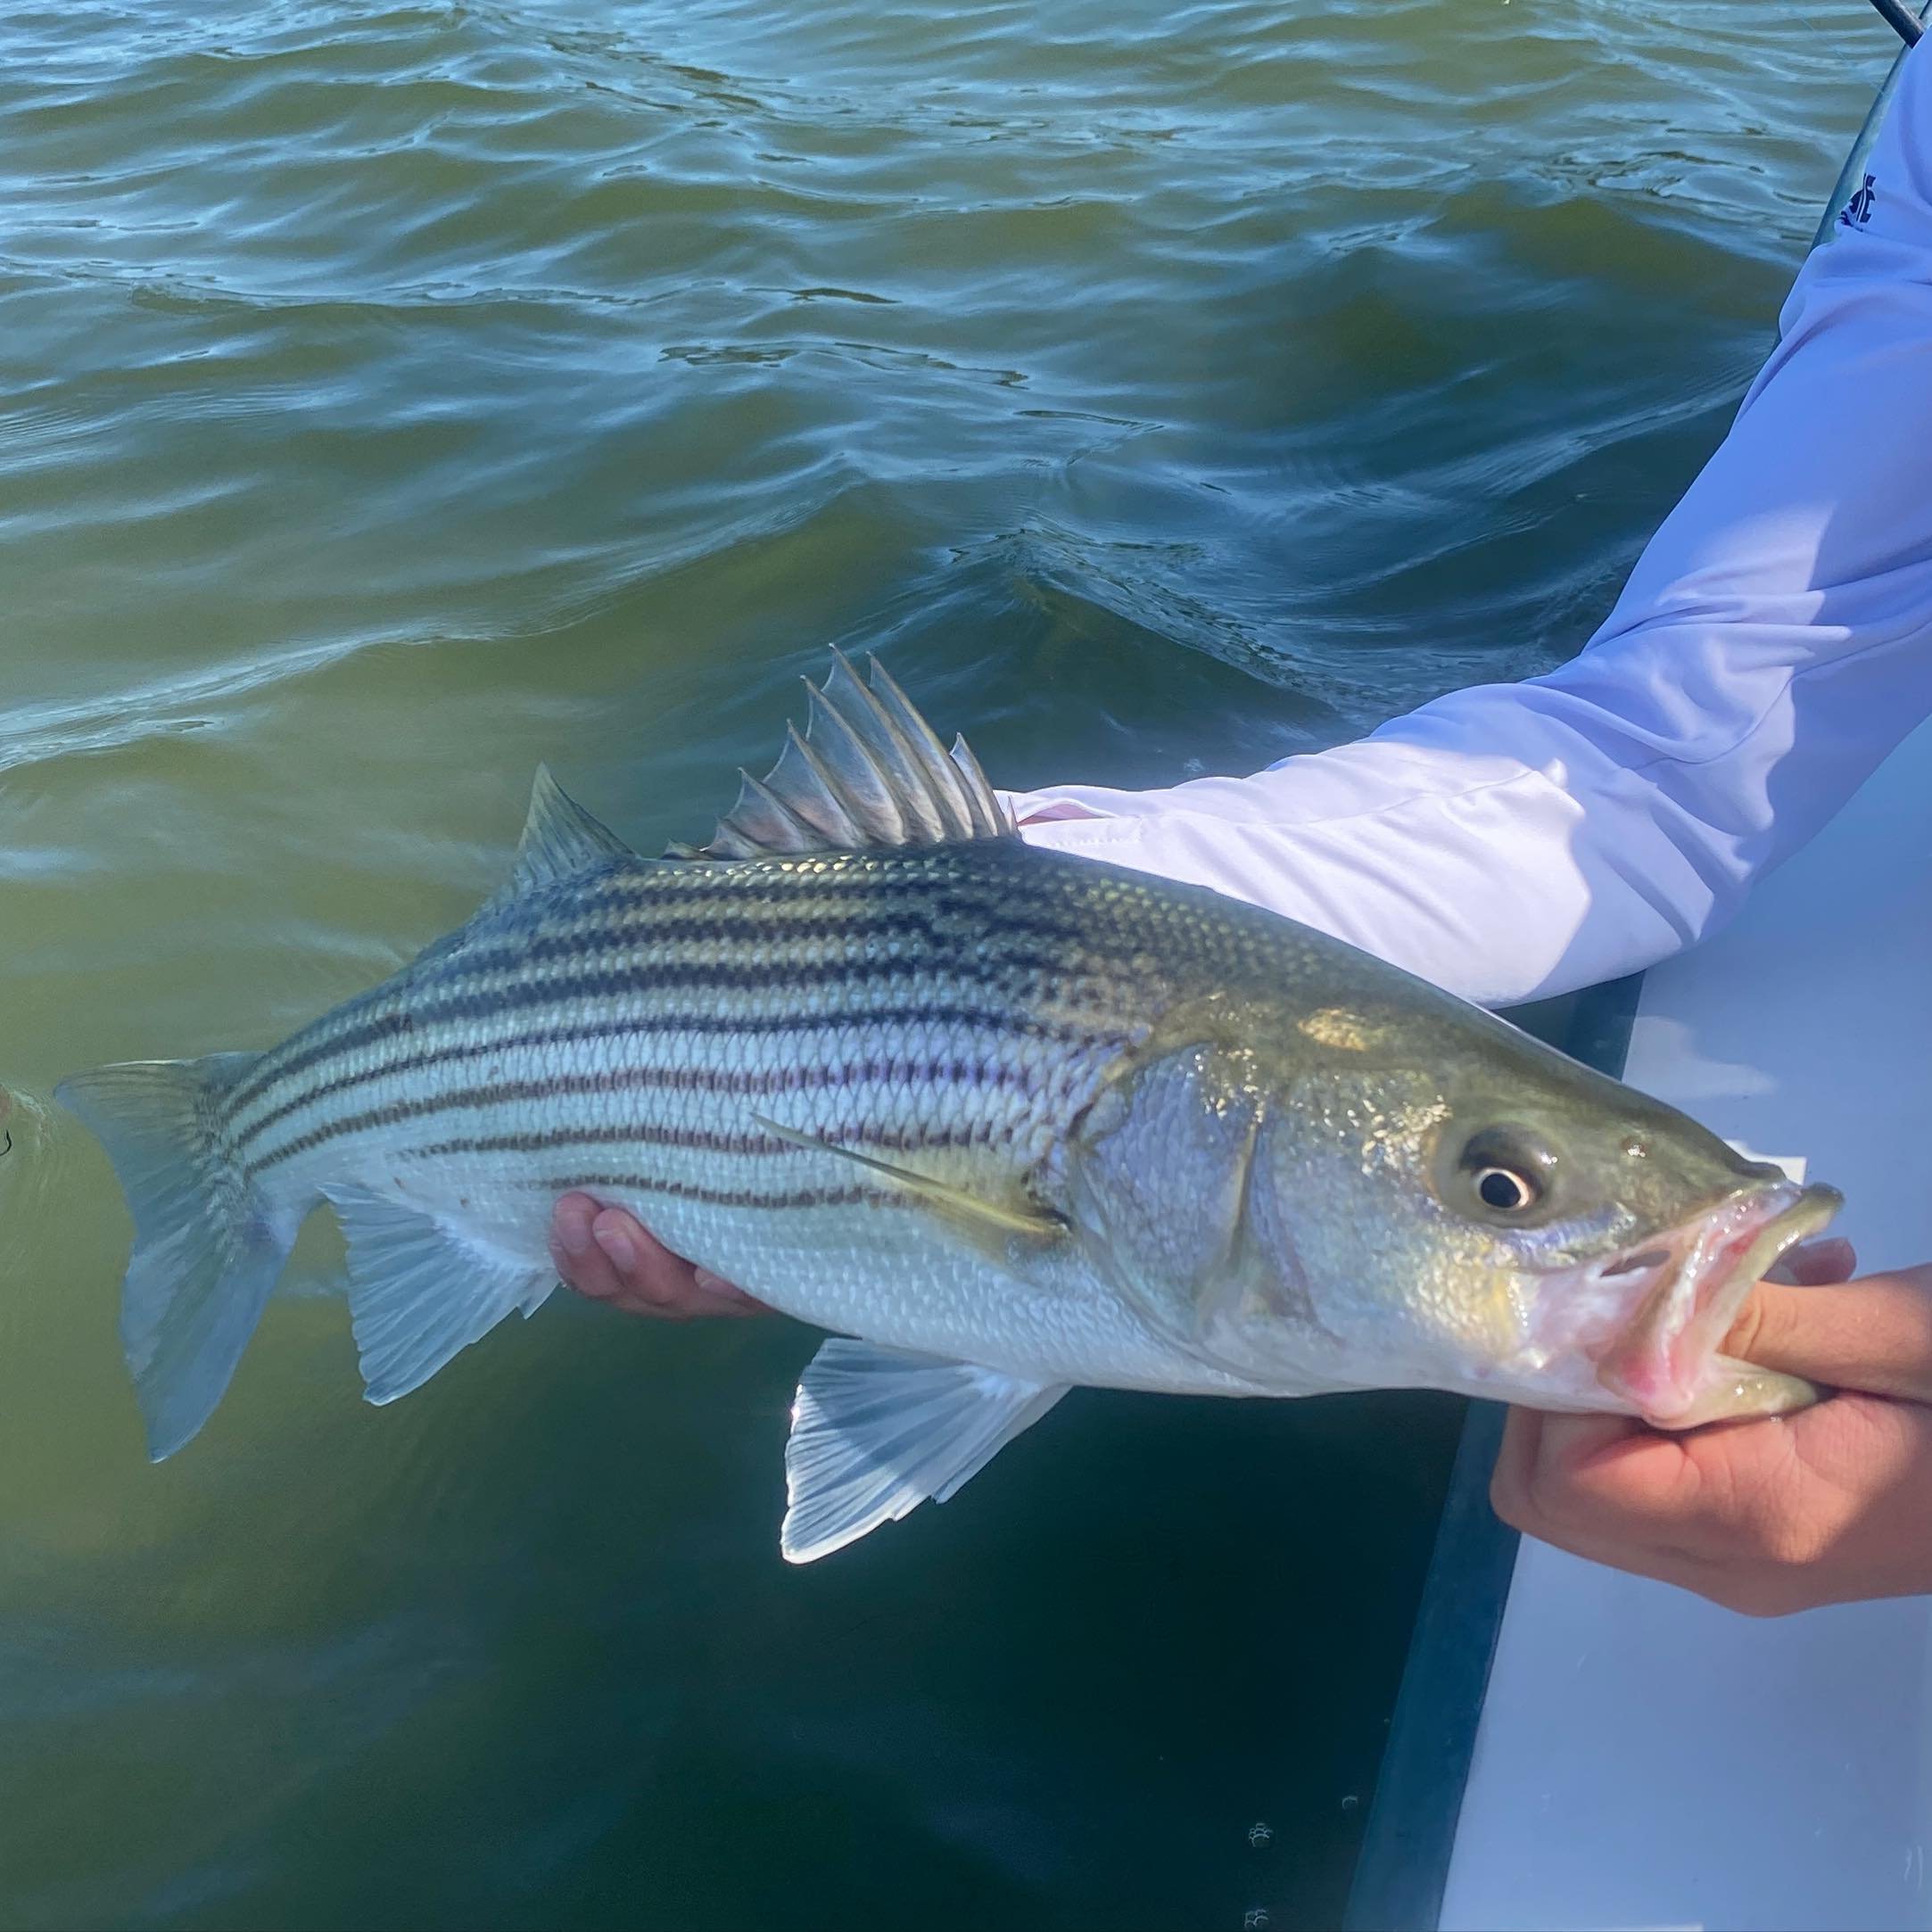 Looks like an early start to the season- June dates getting tight.  Let&rsquo;s catch em up!! #stripedbass #catchandrelease #cascobay